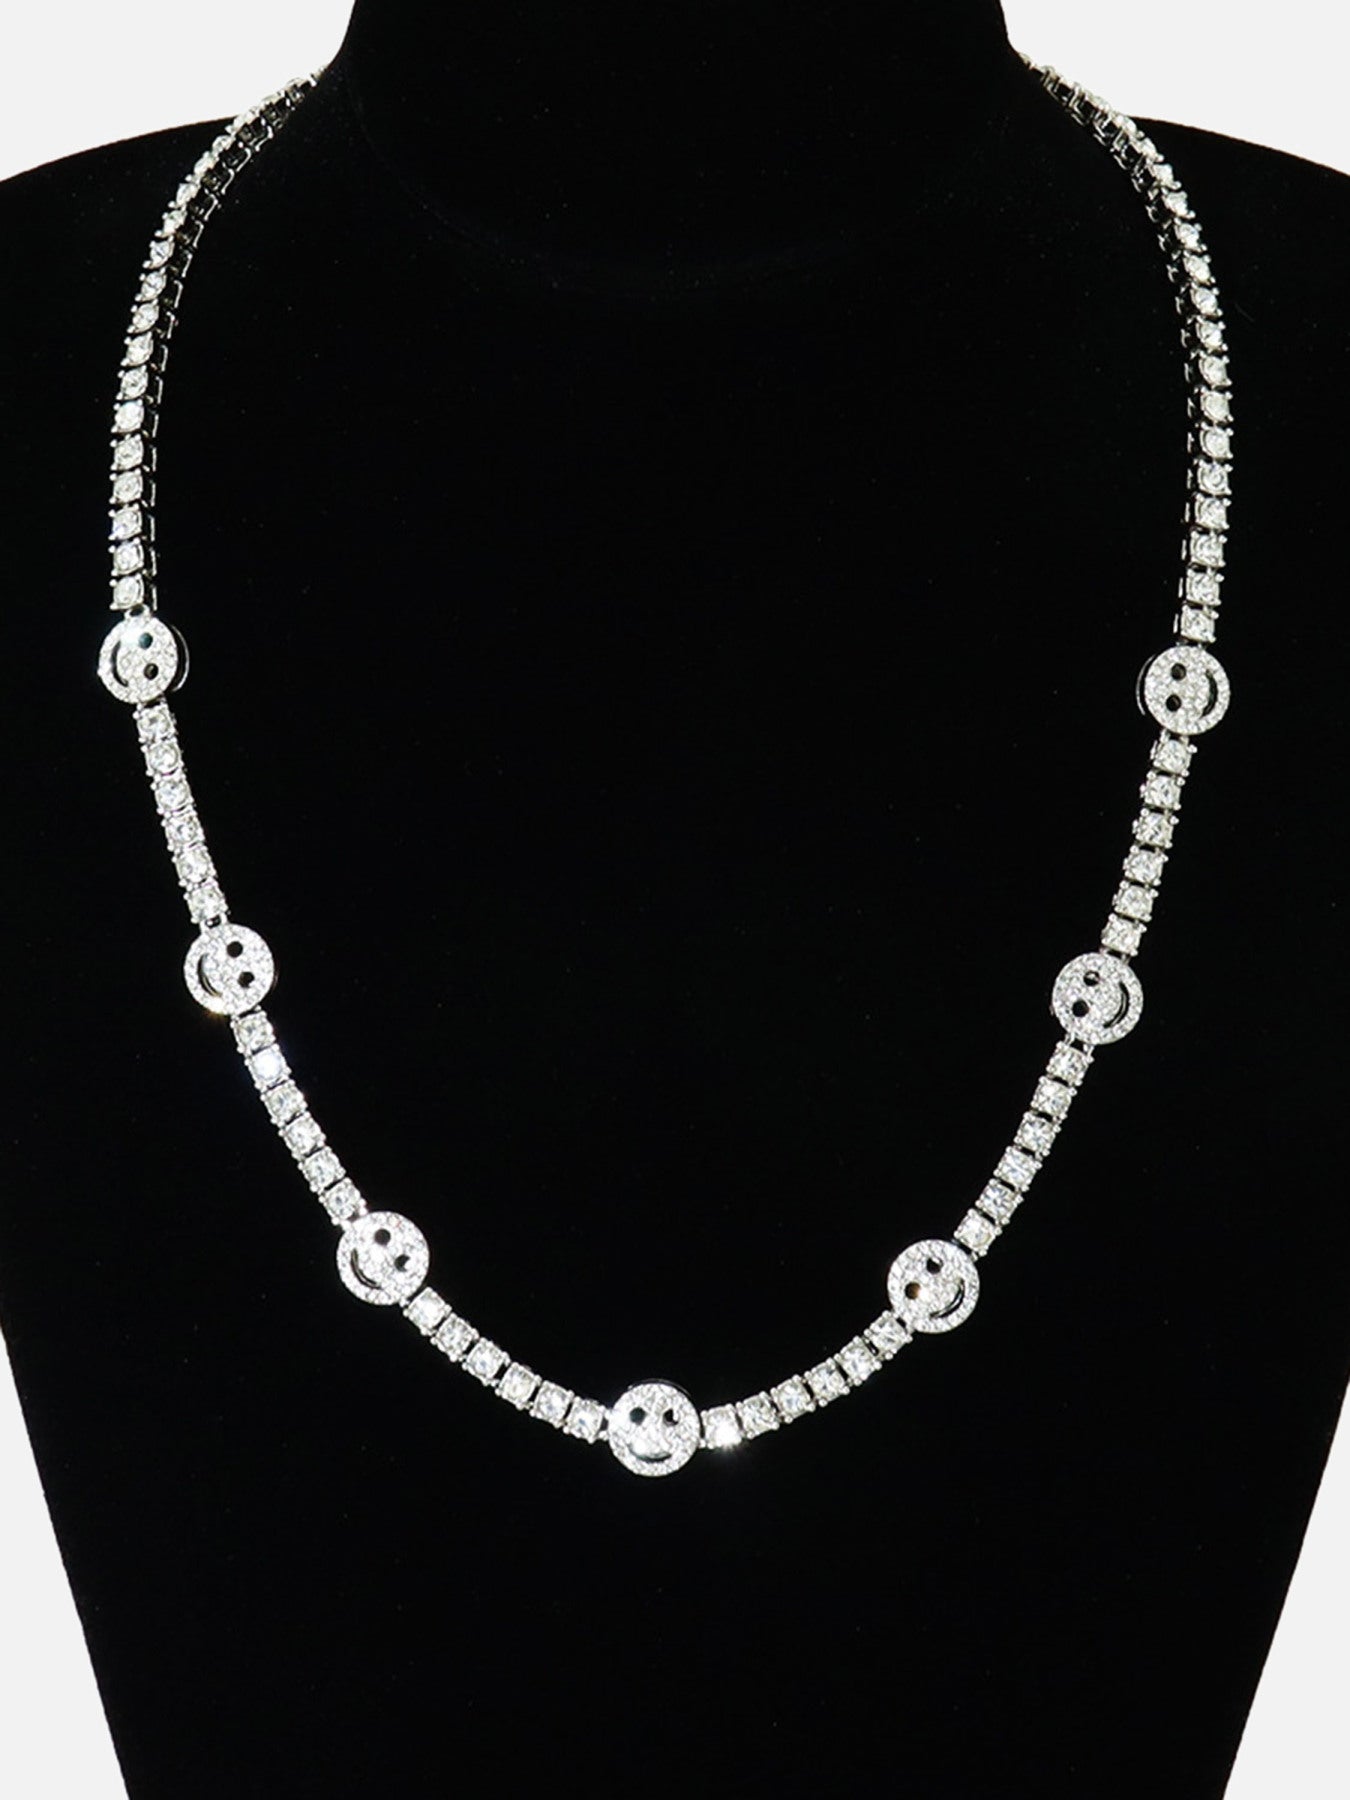 Thesupermade Full Diamond Smile Necklace